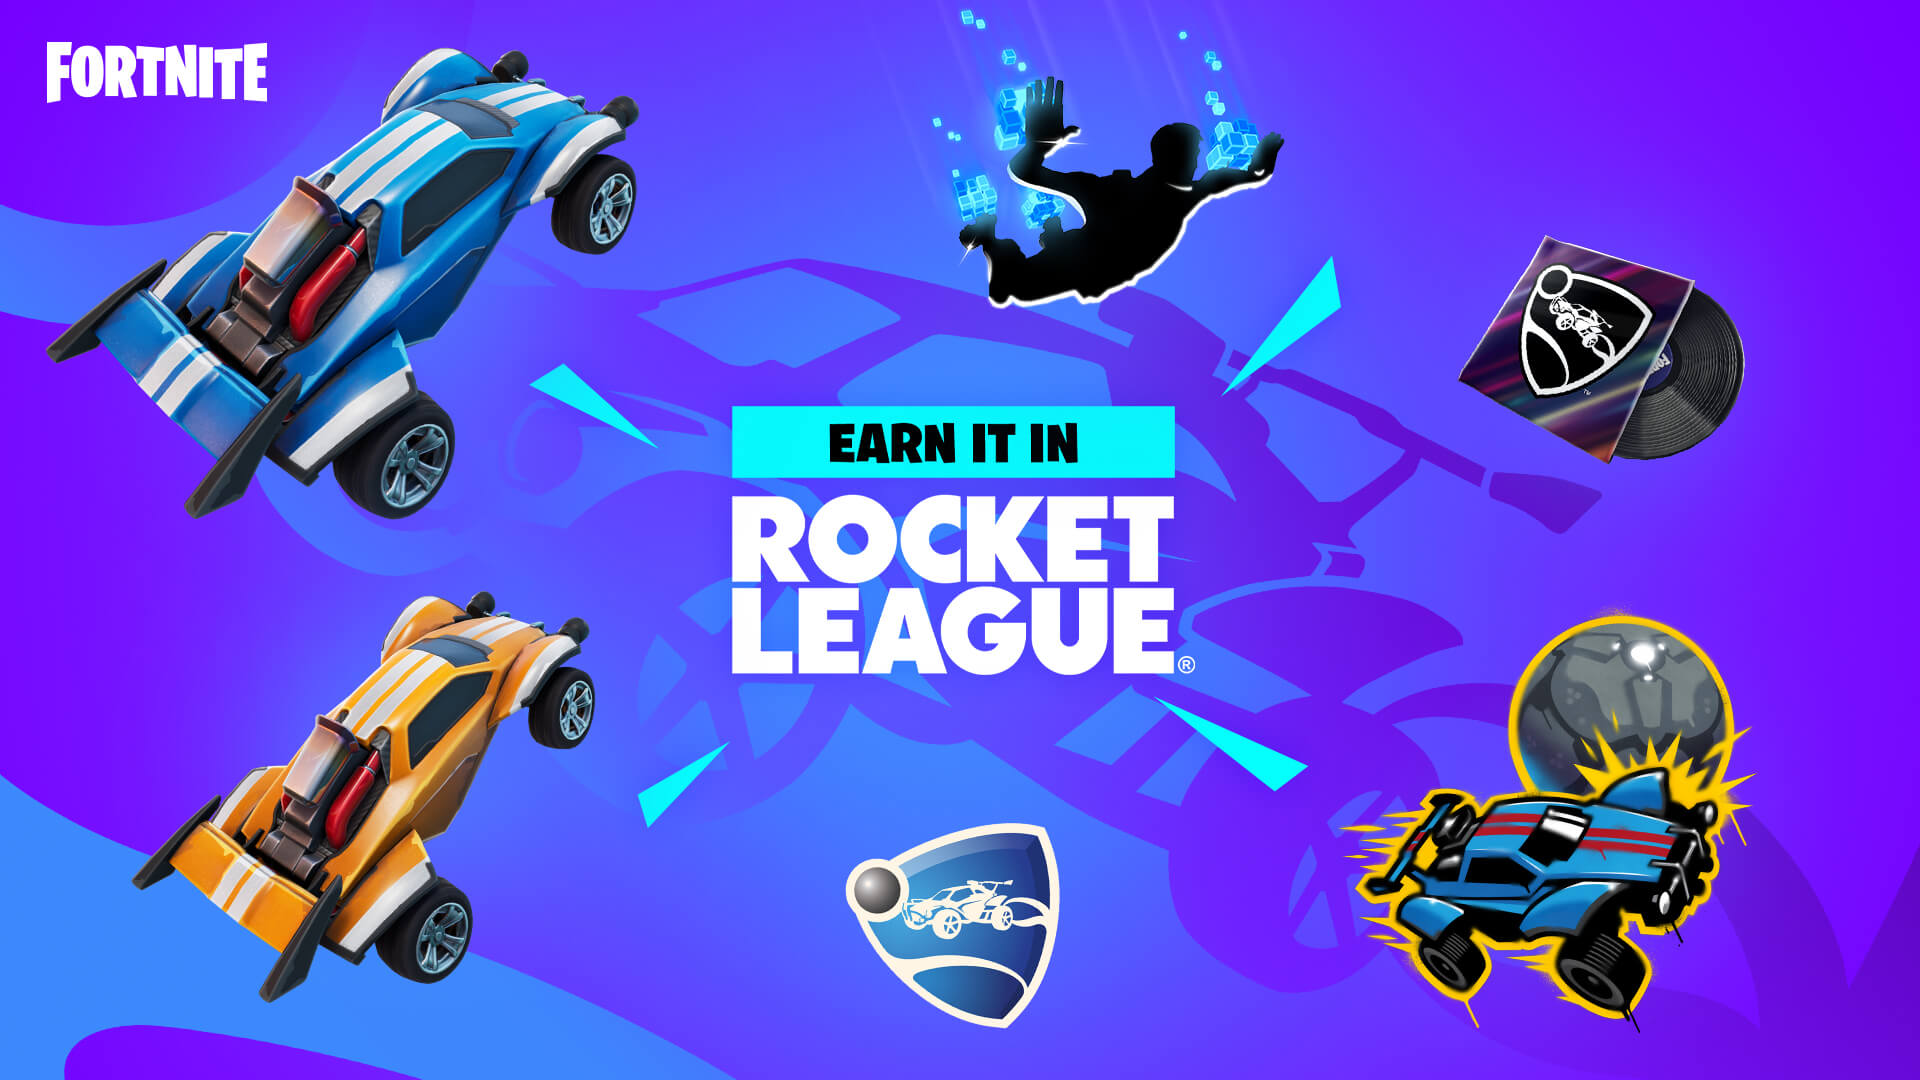 Free Rewards Rocket League And Fortnite Epic Games From 26 Sep All Platforms - roblox script killer queen how to get free robux 2019